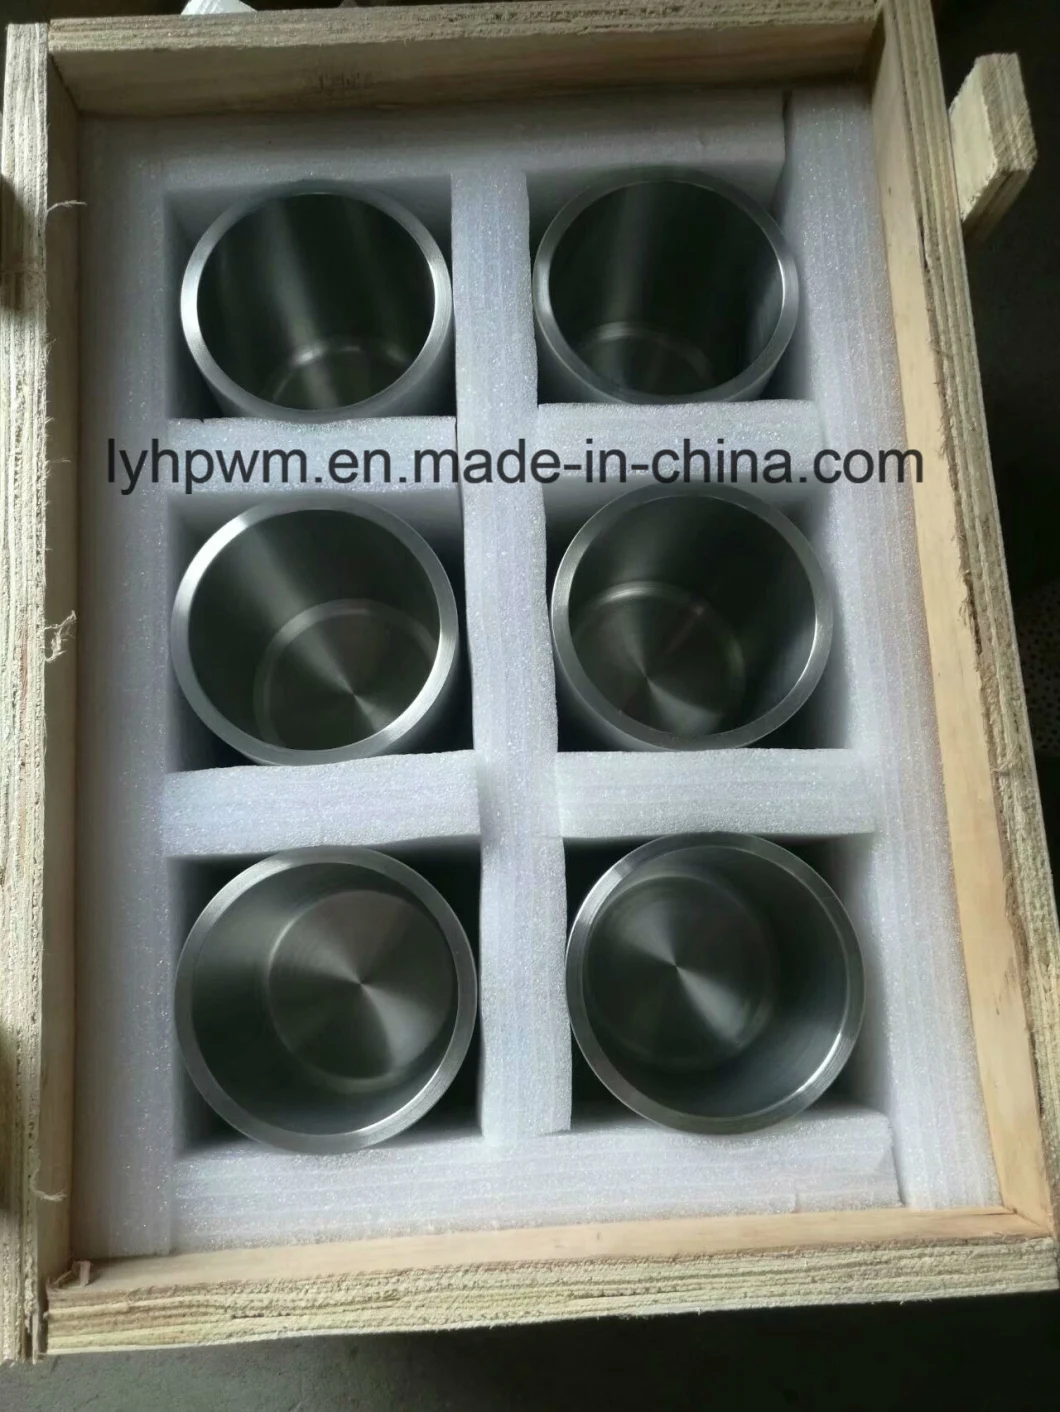 Sinter&Forged Molybdenum Crucible Supplier, Molybdenum Crucible for Sapphire Crystal